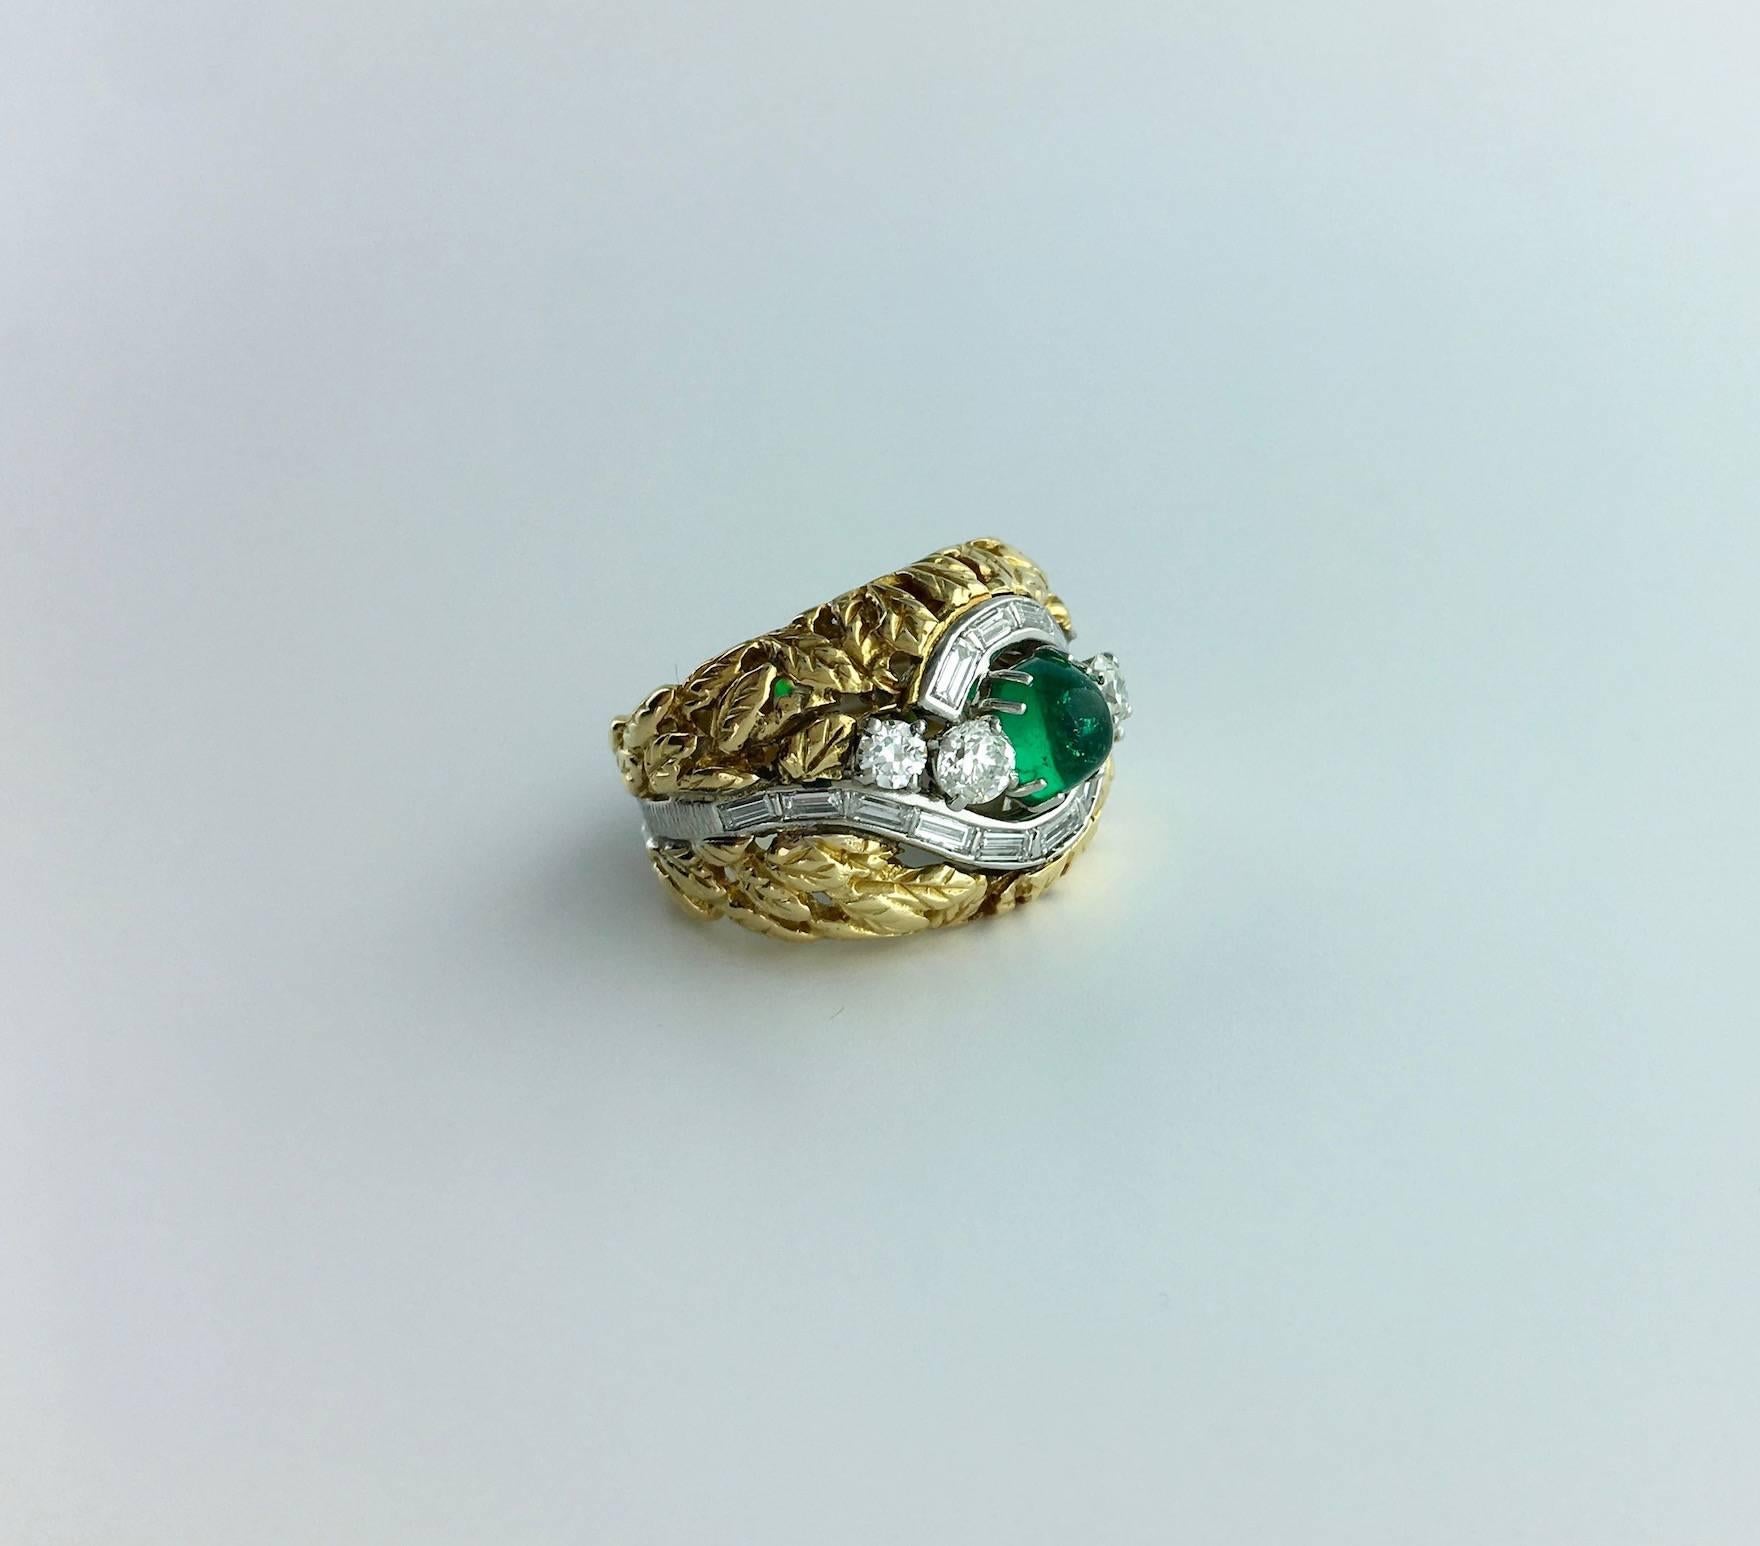 Lovely Floral engraved yellow Gold and Platinum ring with baguette cut and round Diamond (approximately 1.15 carats). In the center a Cabochon Emerald weighting 0.86 carat.
Circa 1970.

Gross weight: 11.86 grams.